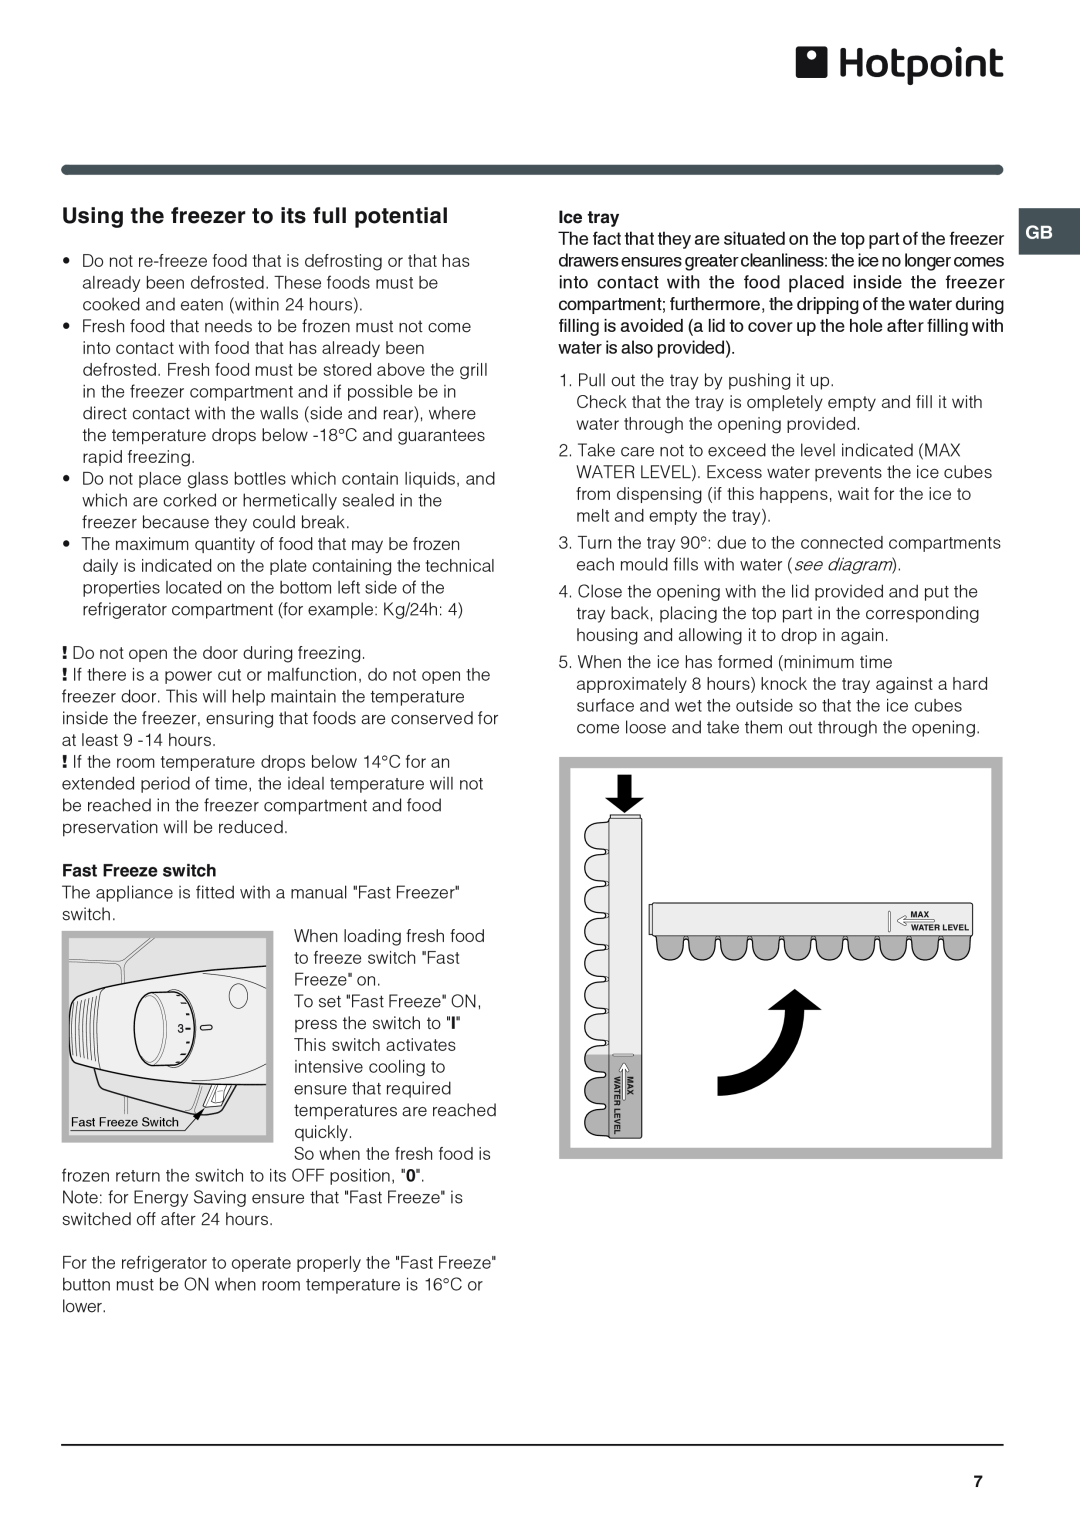 Hotpoint RFA52K operating instructions Using the freezer to its full potential, Fast Freeze switch, Ice tray 